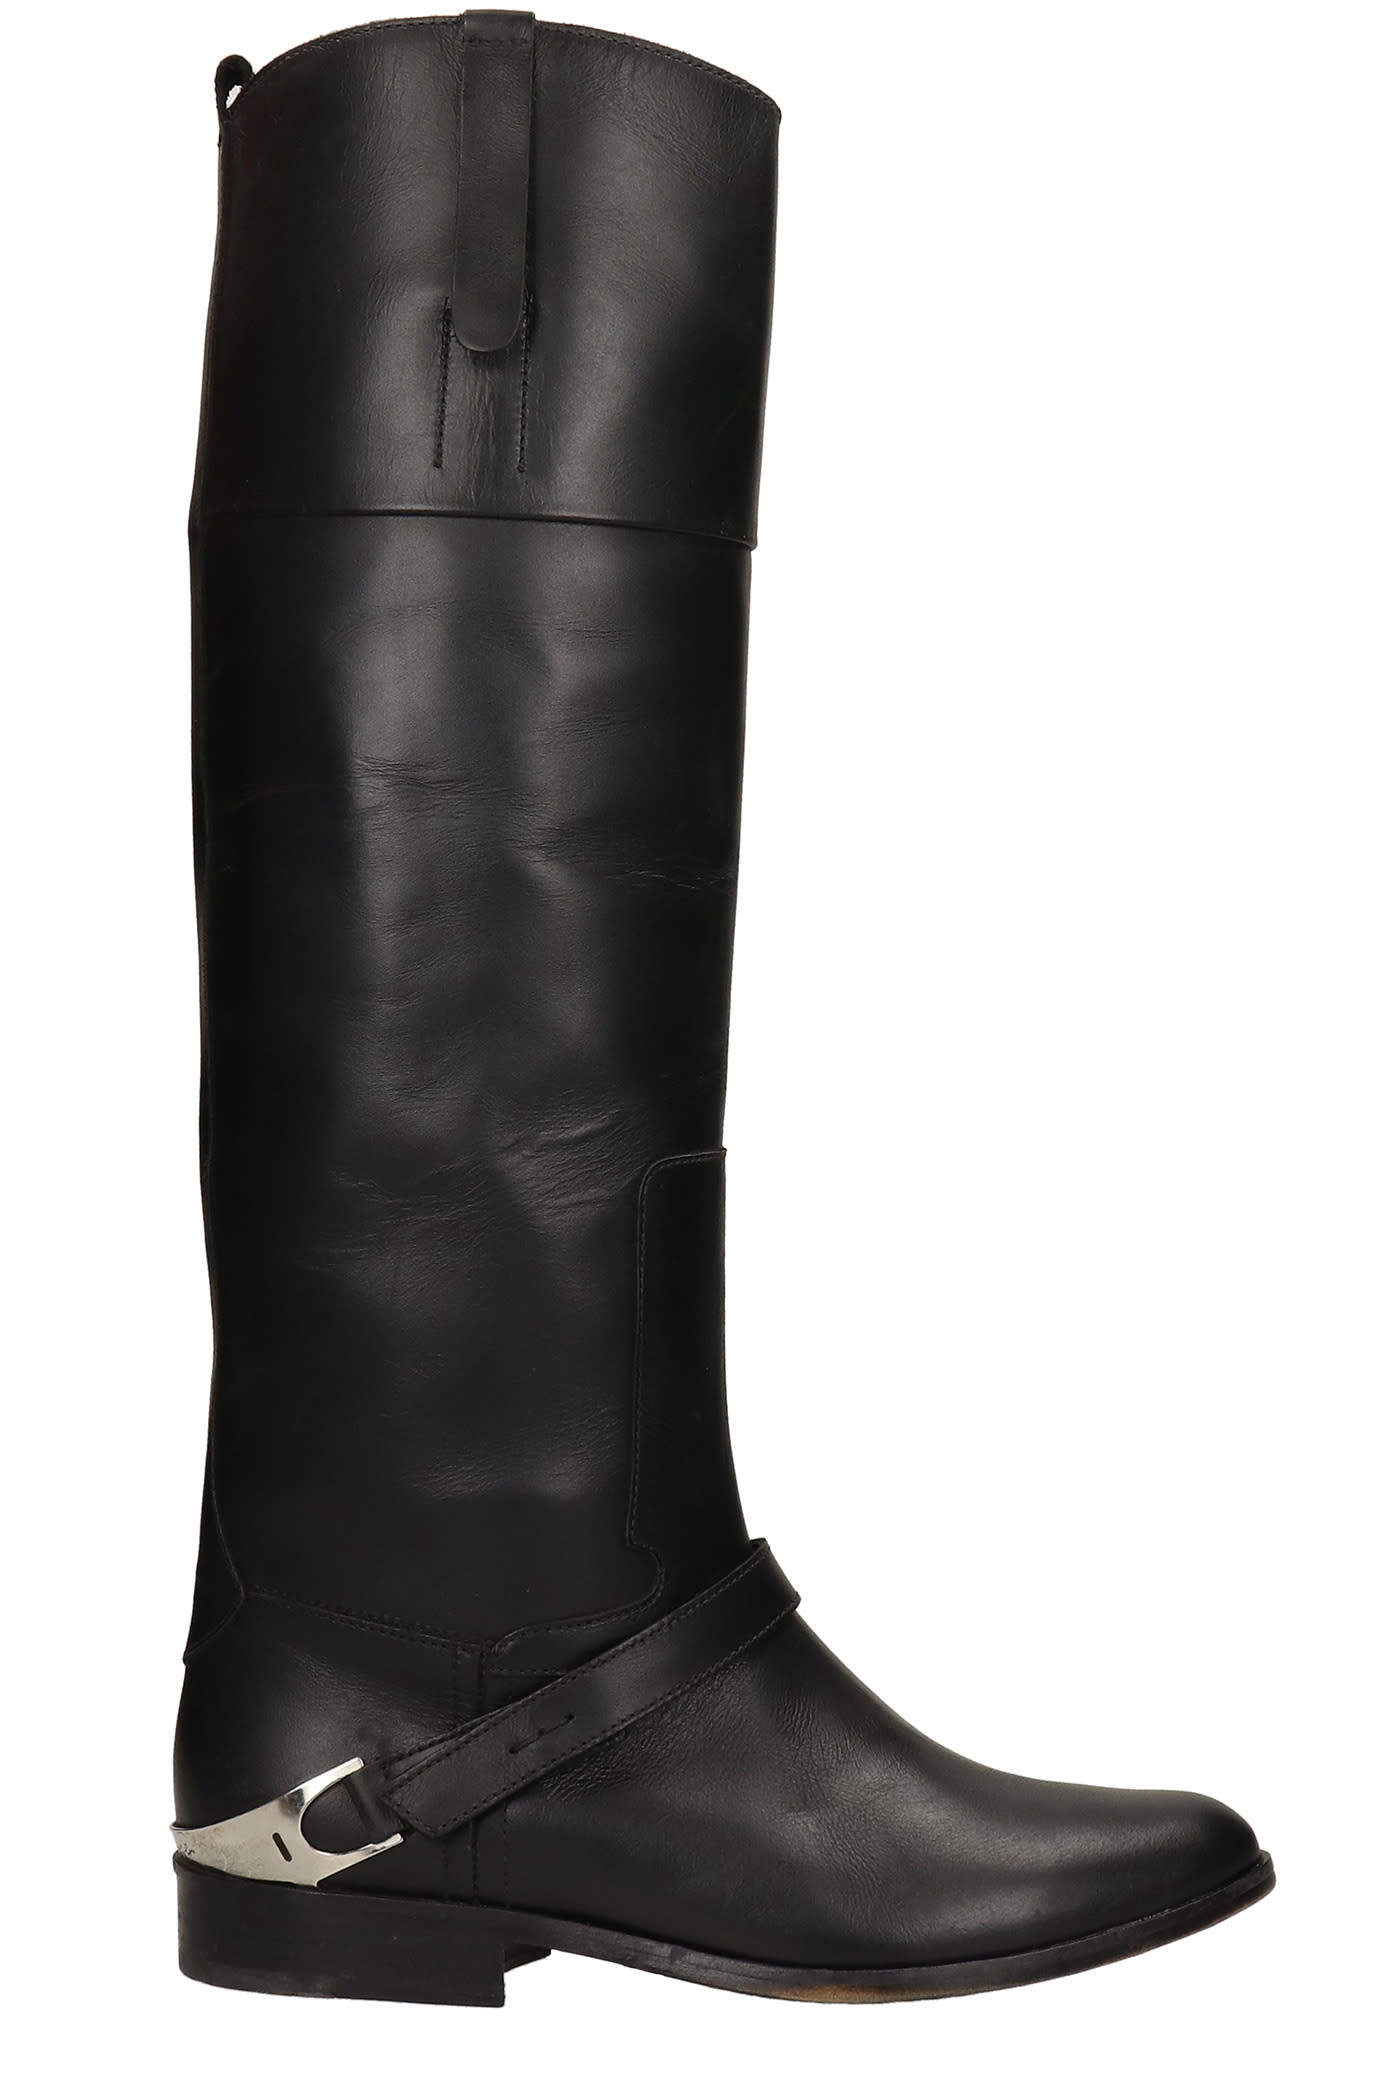 Golden Goose Charlie Texan Boots In Black Leather